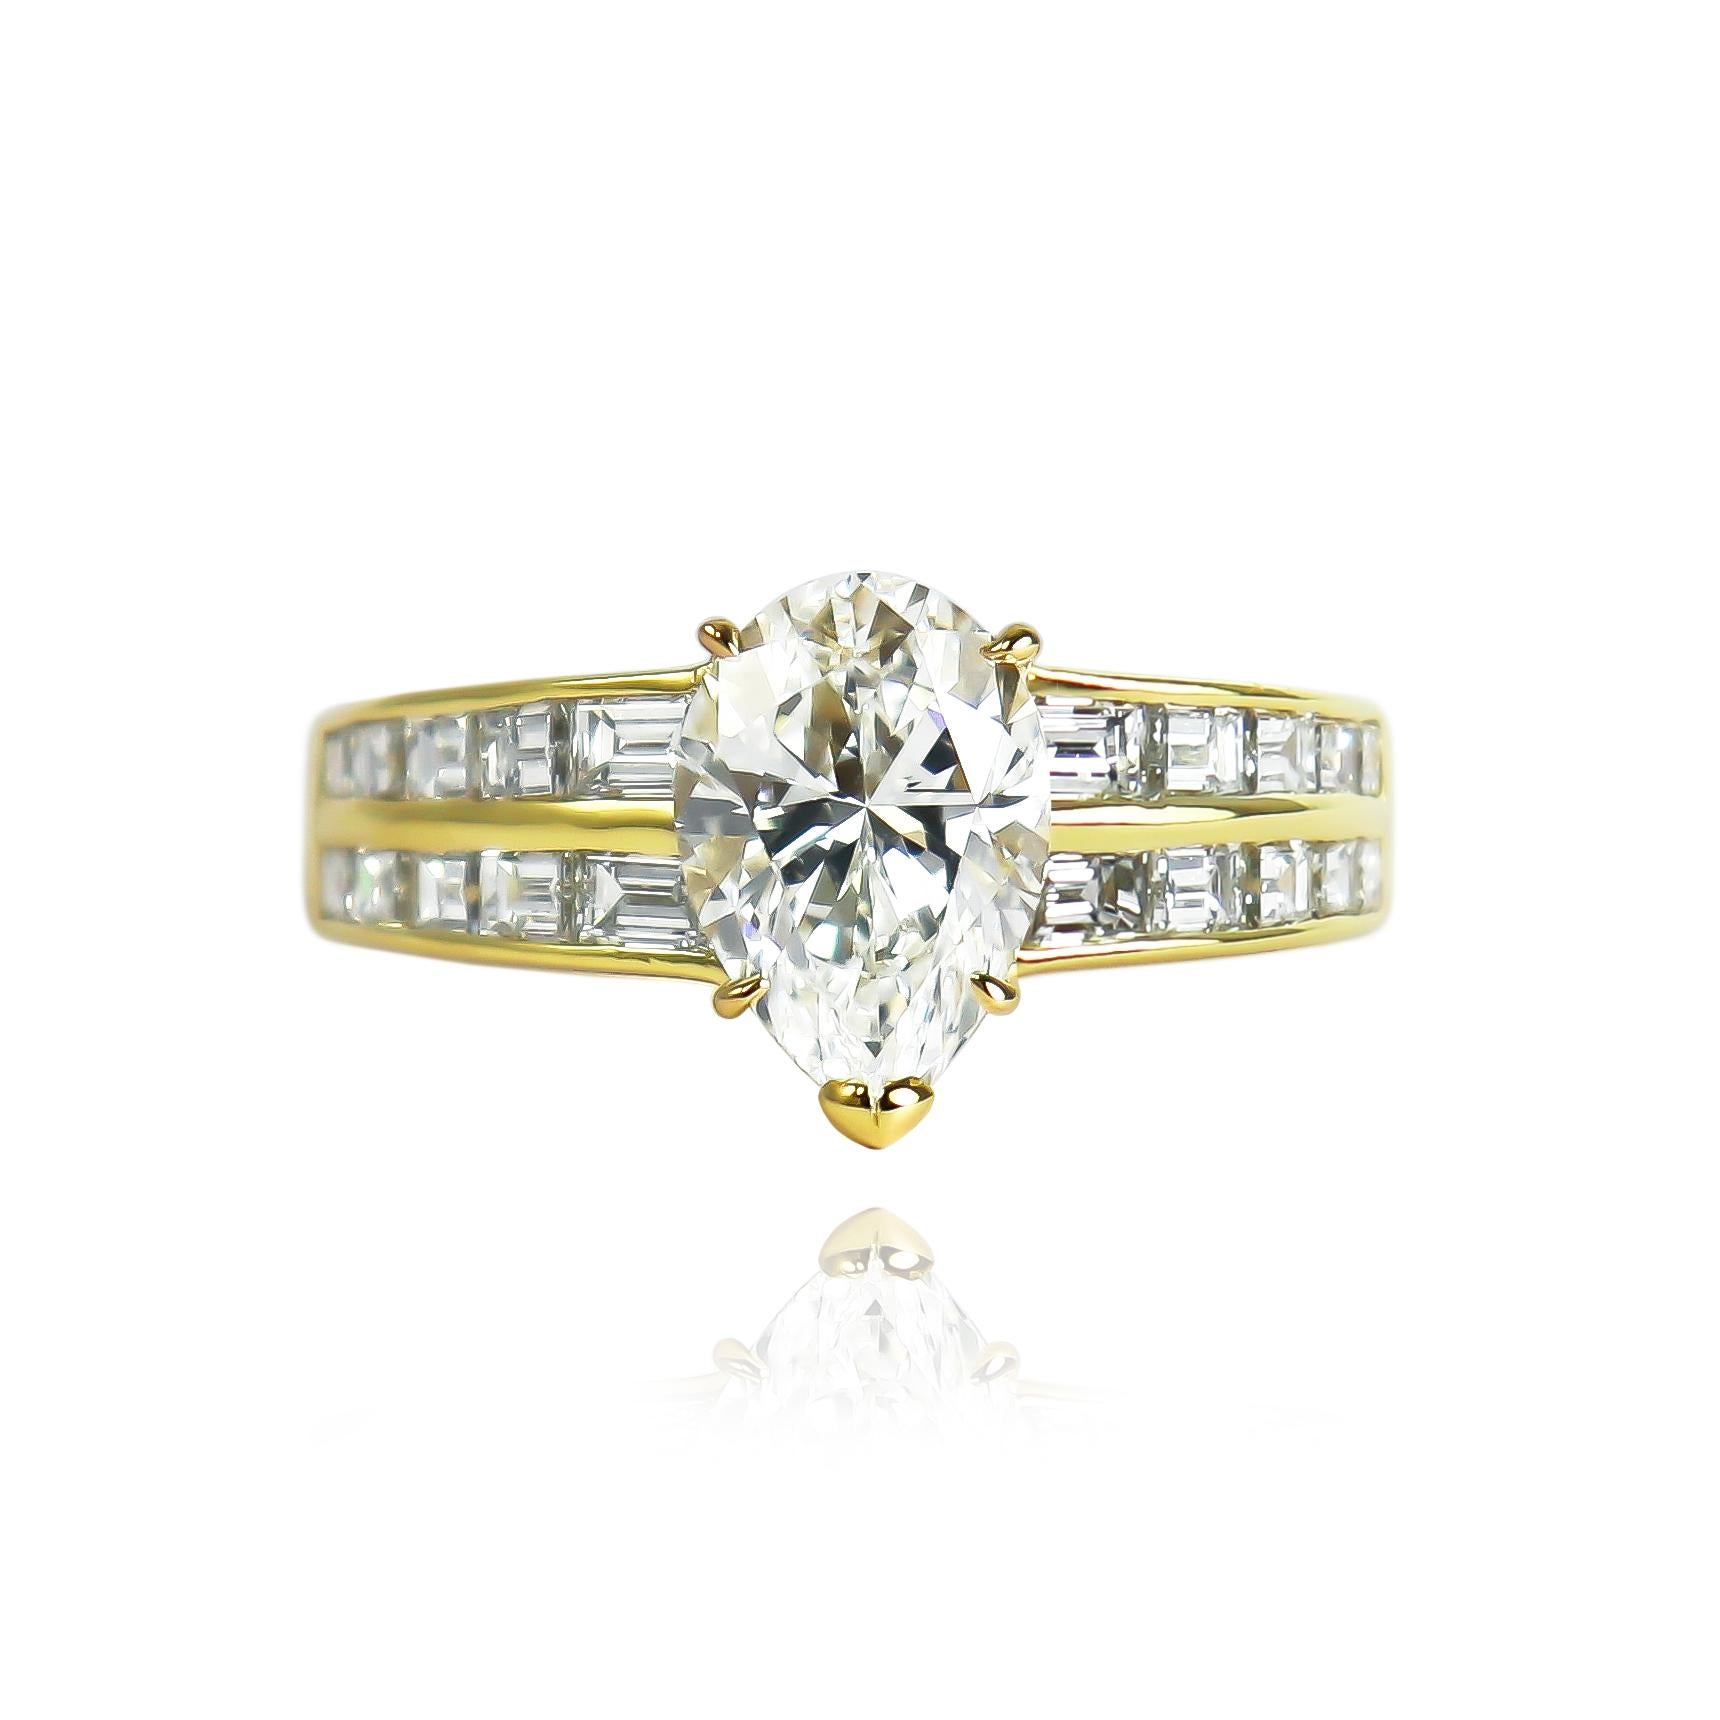 This exceptional ring from the house of Van Cleef and Arpels features a GIA certified 2.00 carat pear modified brilliant cut diamond of E color and VS1 clarity. Set in a 18K yellow gold setting with 20 straight baguettes, this scintillating piece is